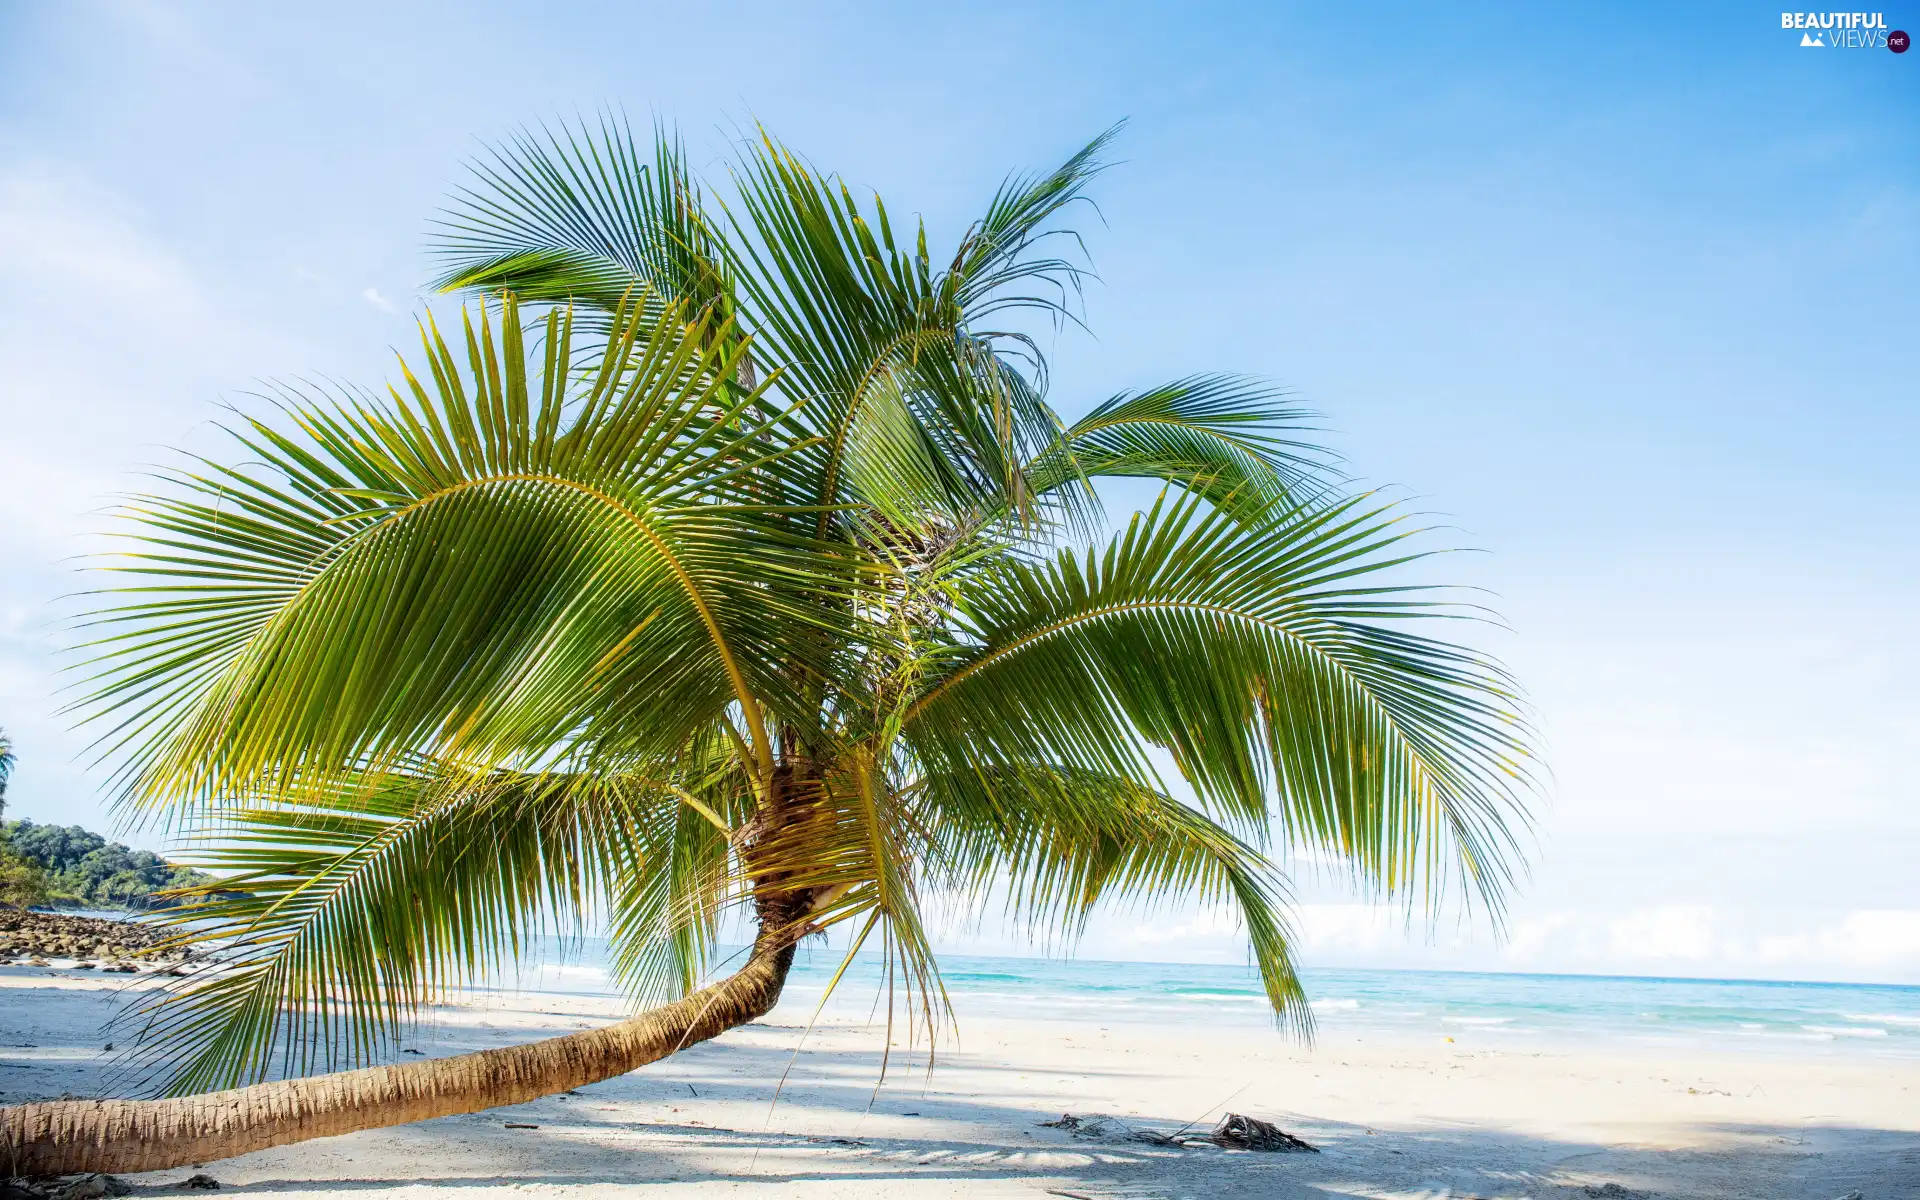 sea, Beaches, Palm, Tropical, inclined, Sand